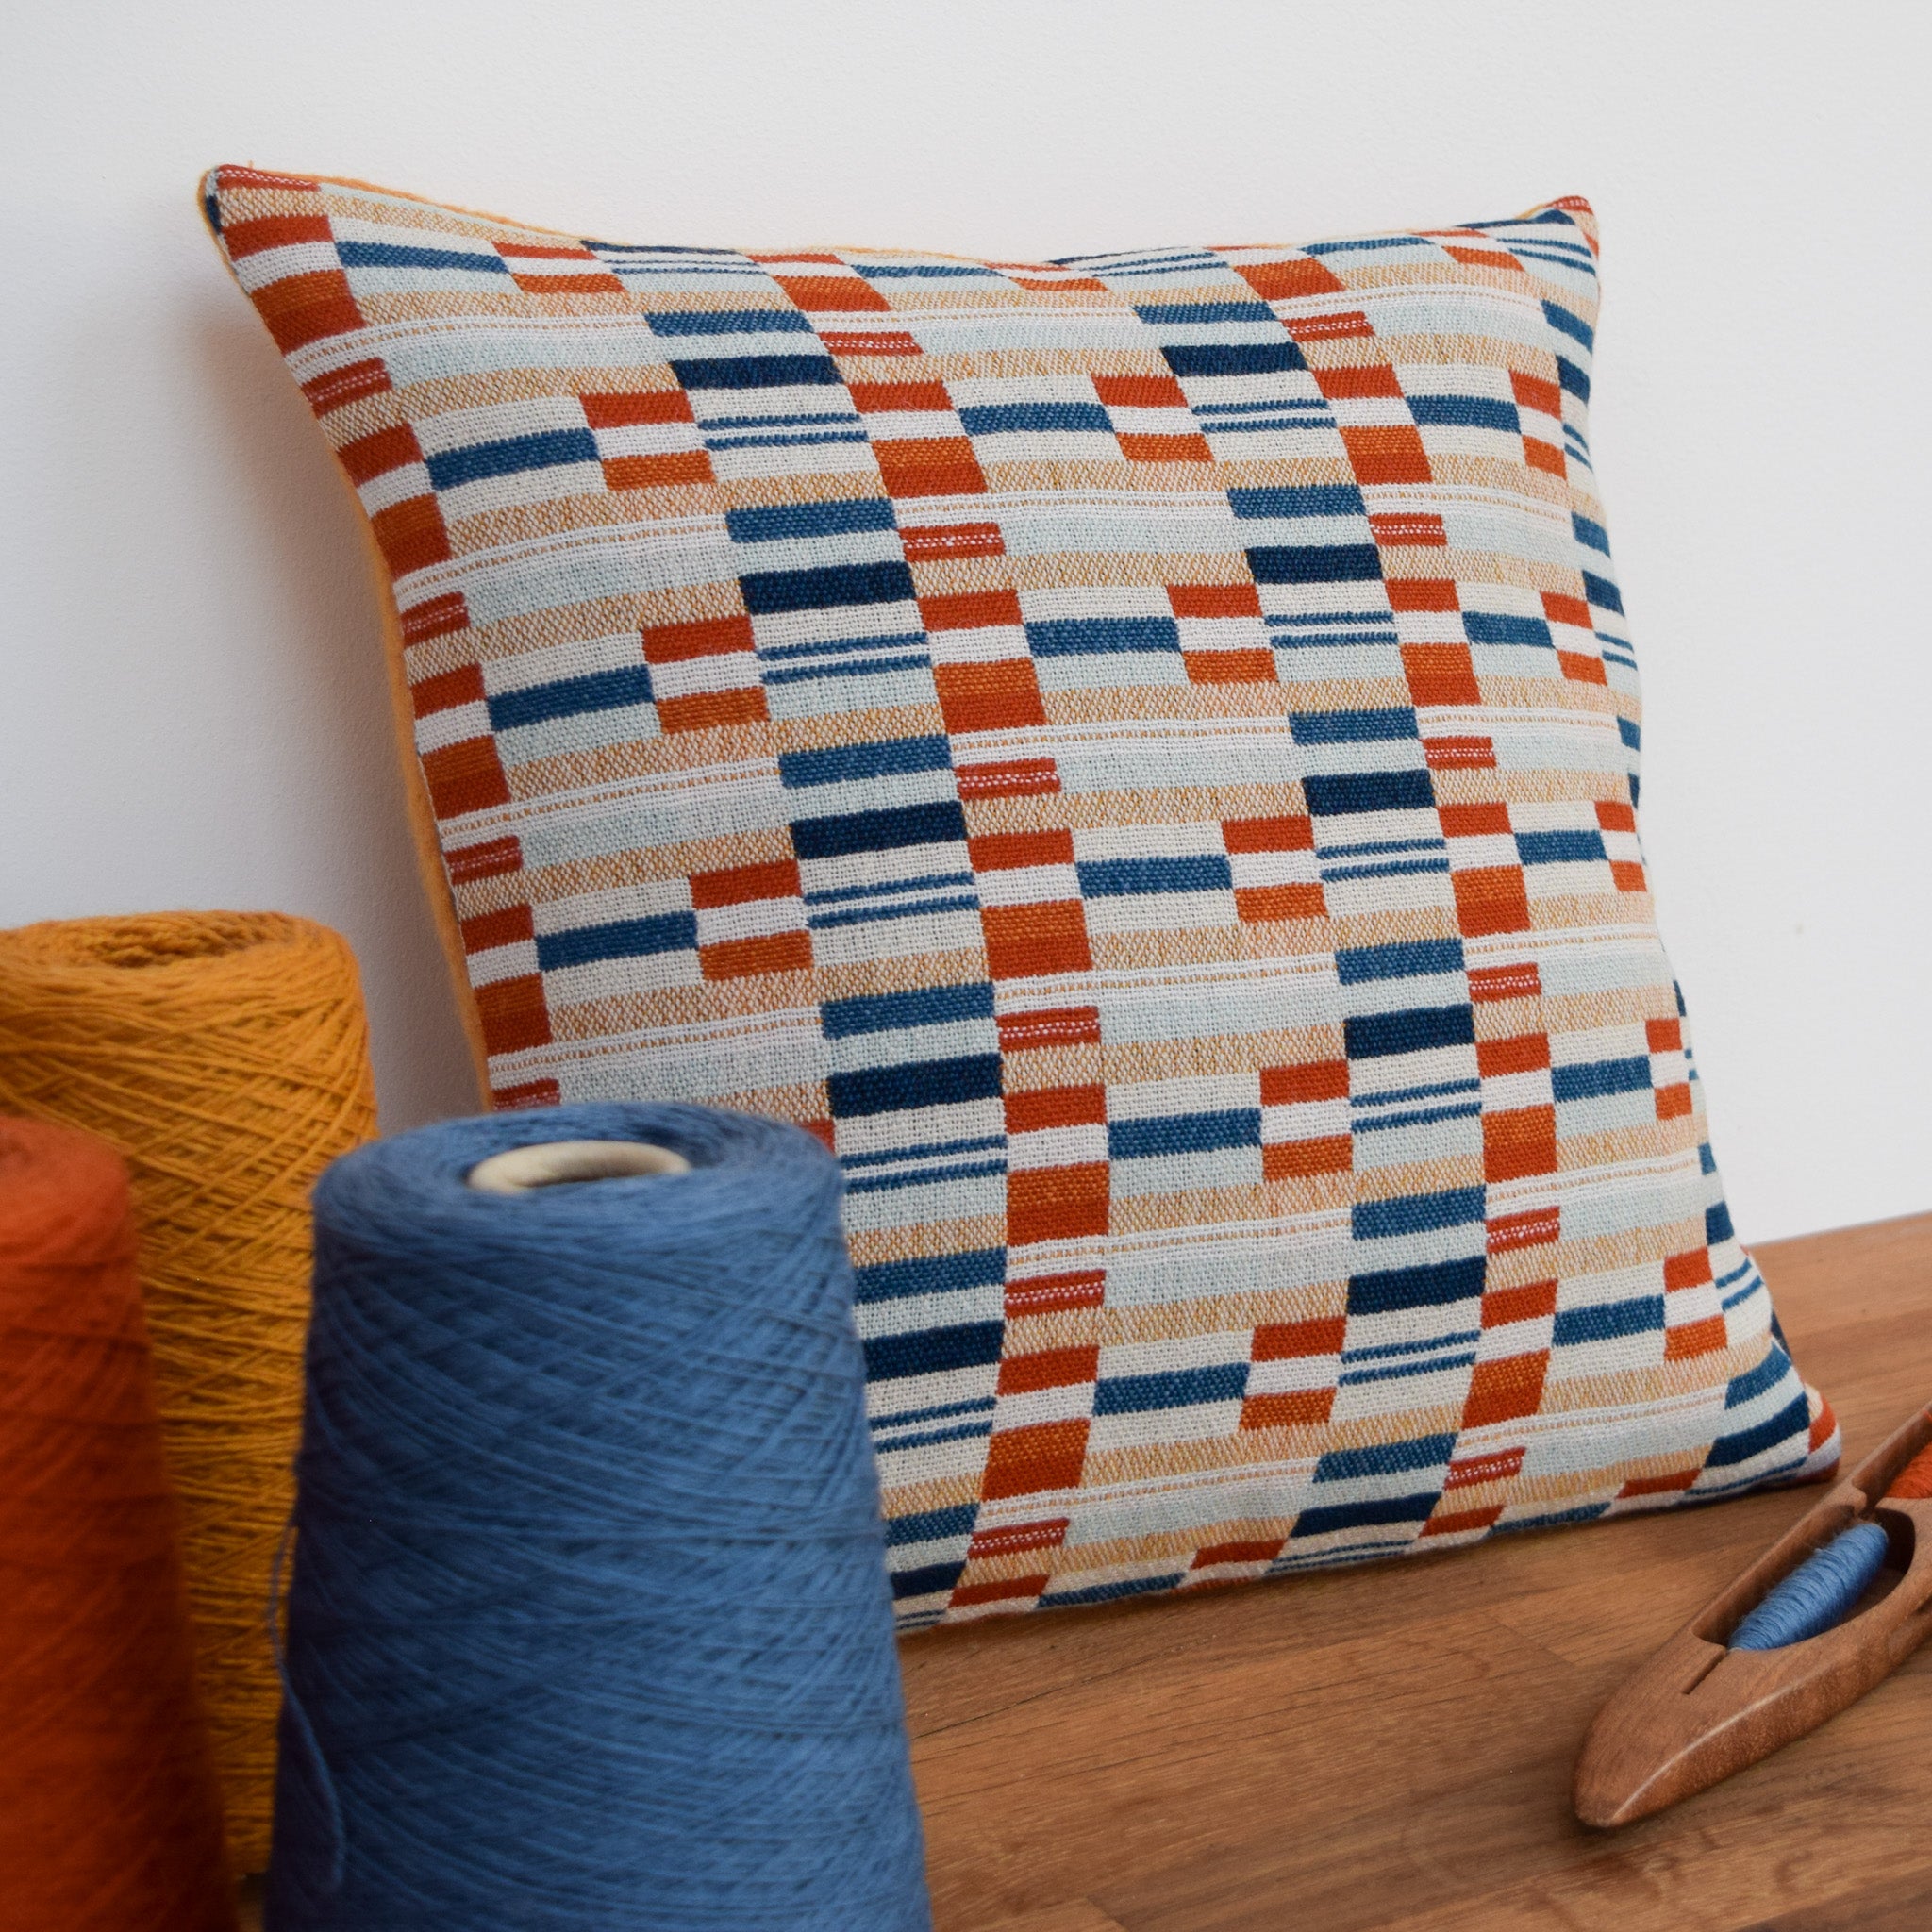 Photo showing a cushion with  a mixture of horizontal rectangular blocks of orange, yellow and blues to create the design. There are also three cones of yarn showing the burnt orange, mustard and blue yarns which have been used to create the handwoven cloth.